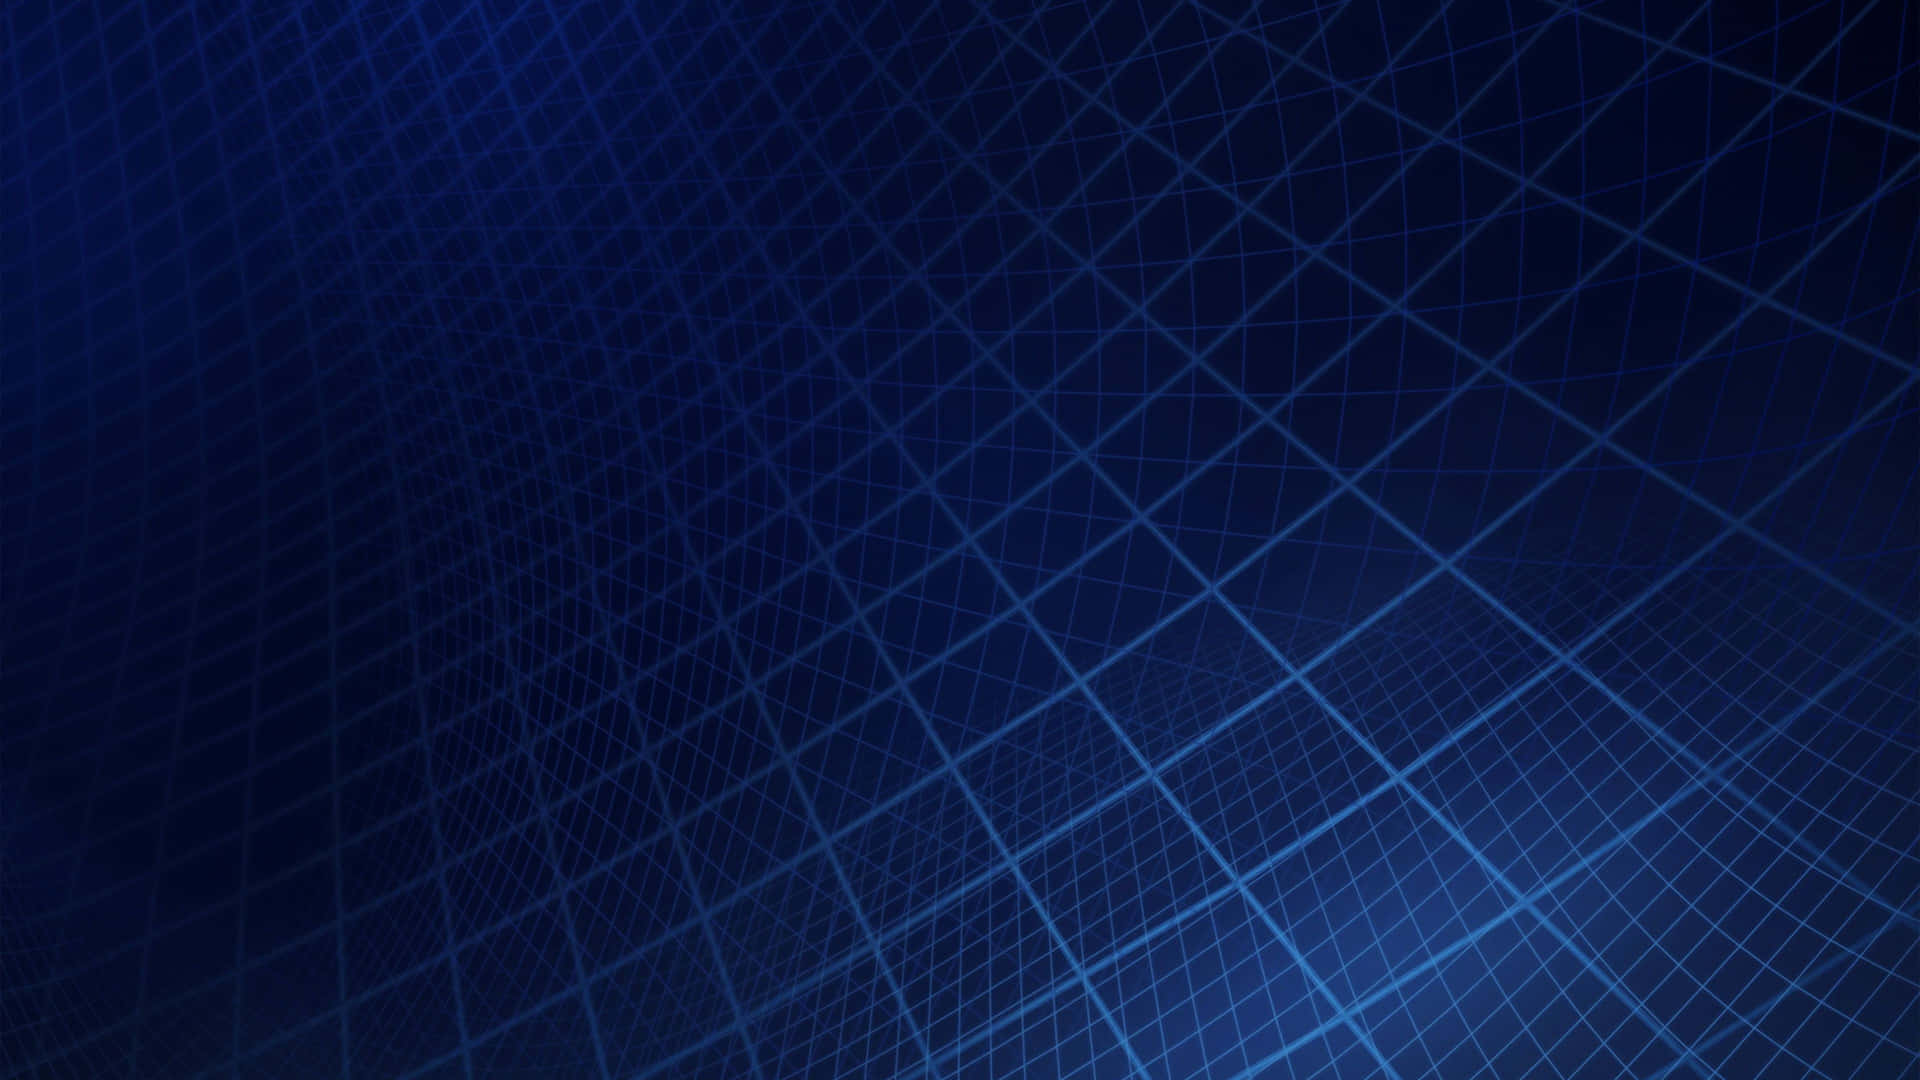 Blue Abstract Background With Lines Wallpaper